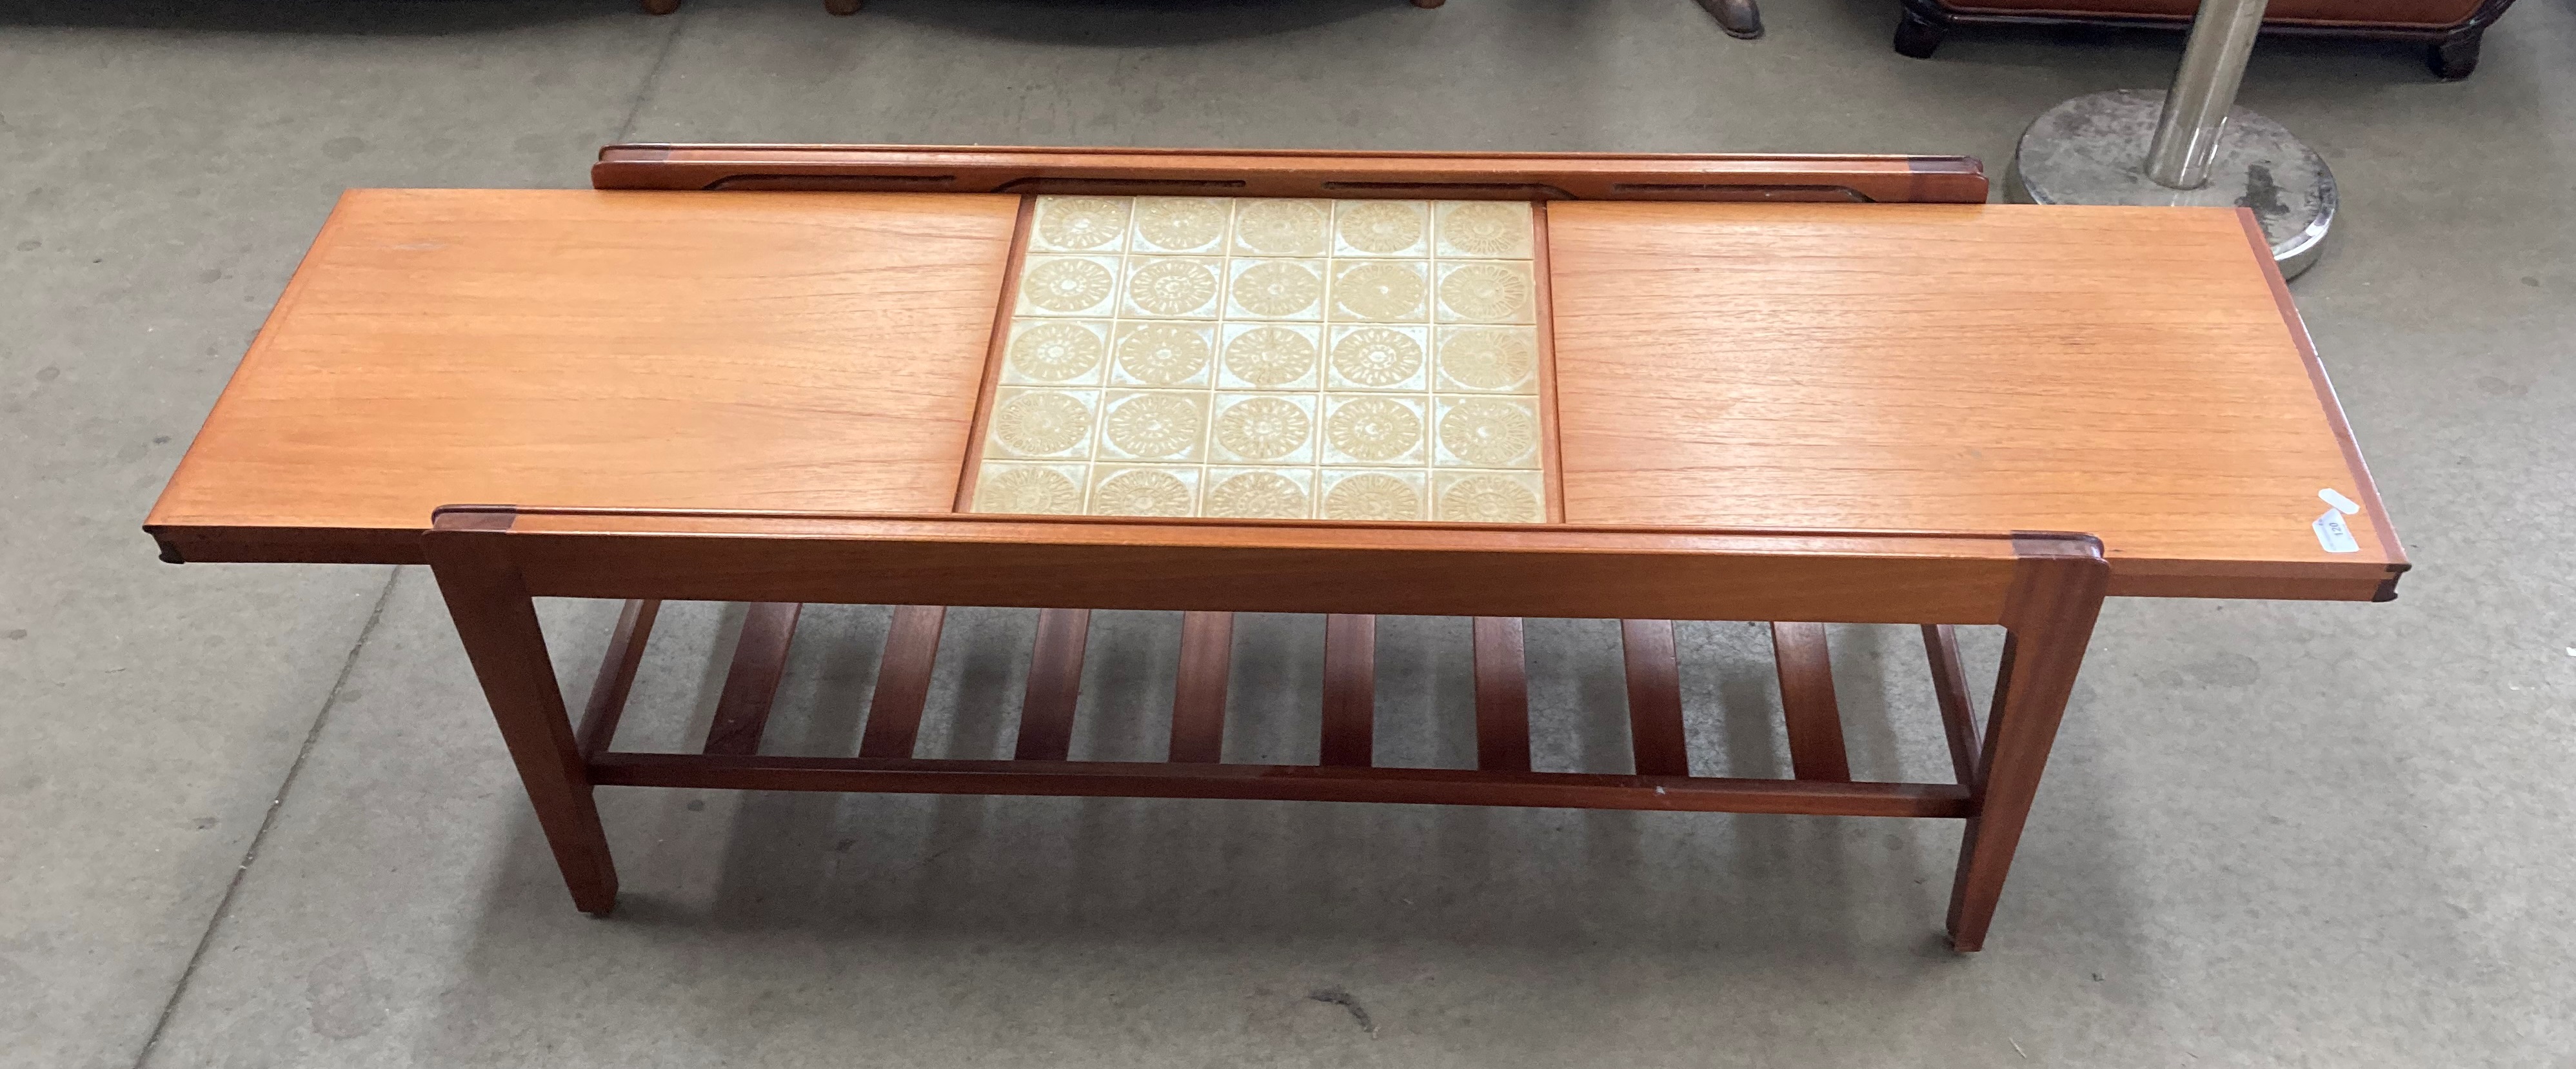 A teak extending top coffee table - when open it reveals a brown patterned tiled centre section